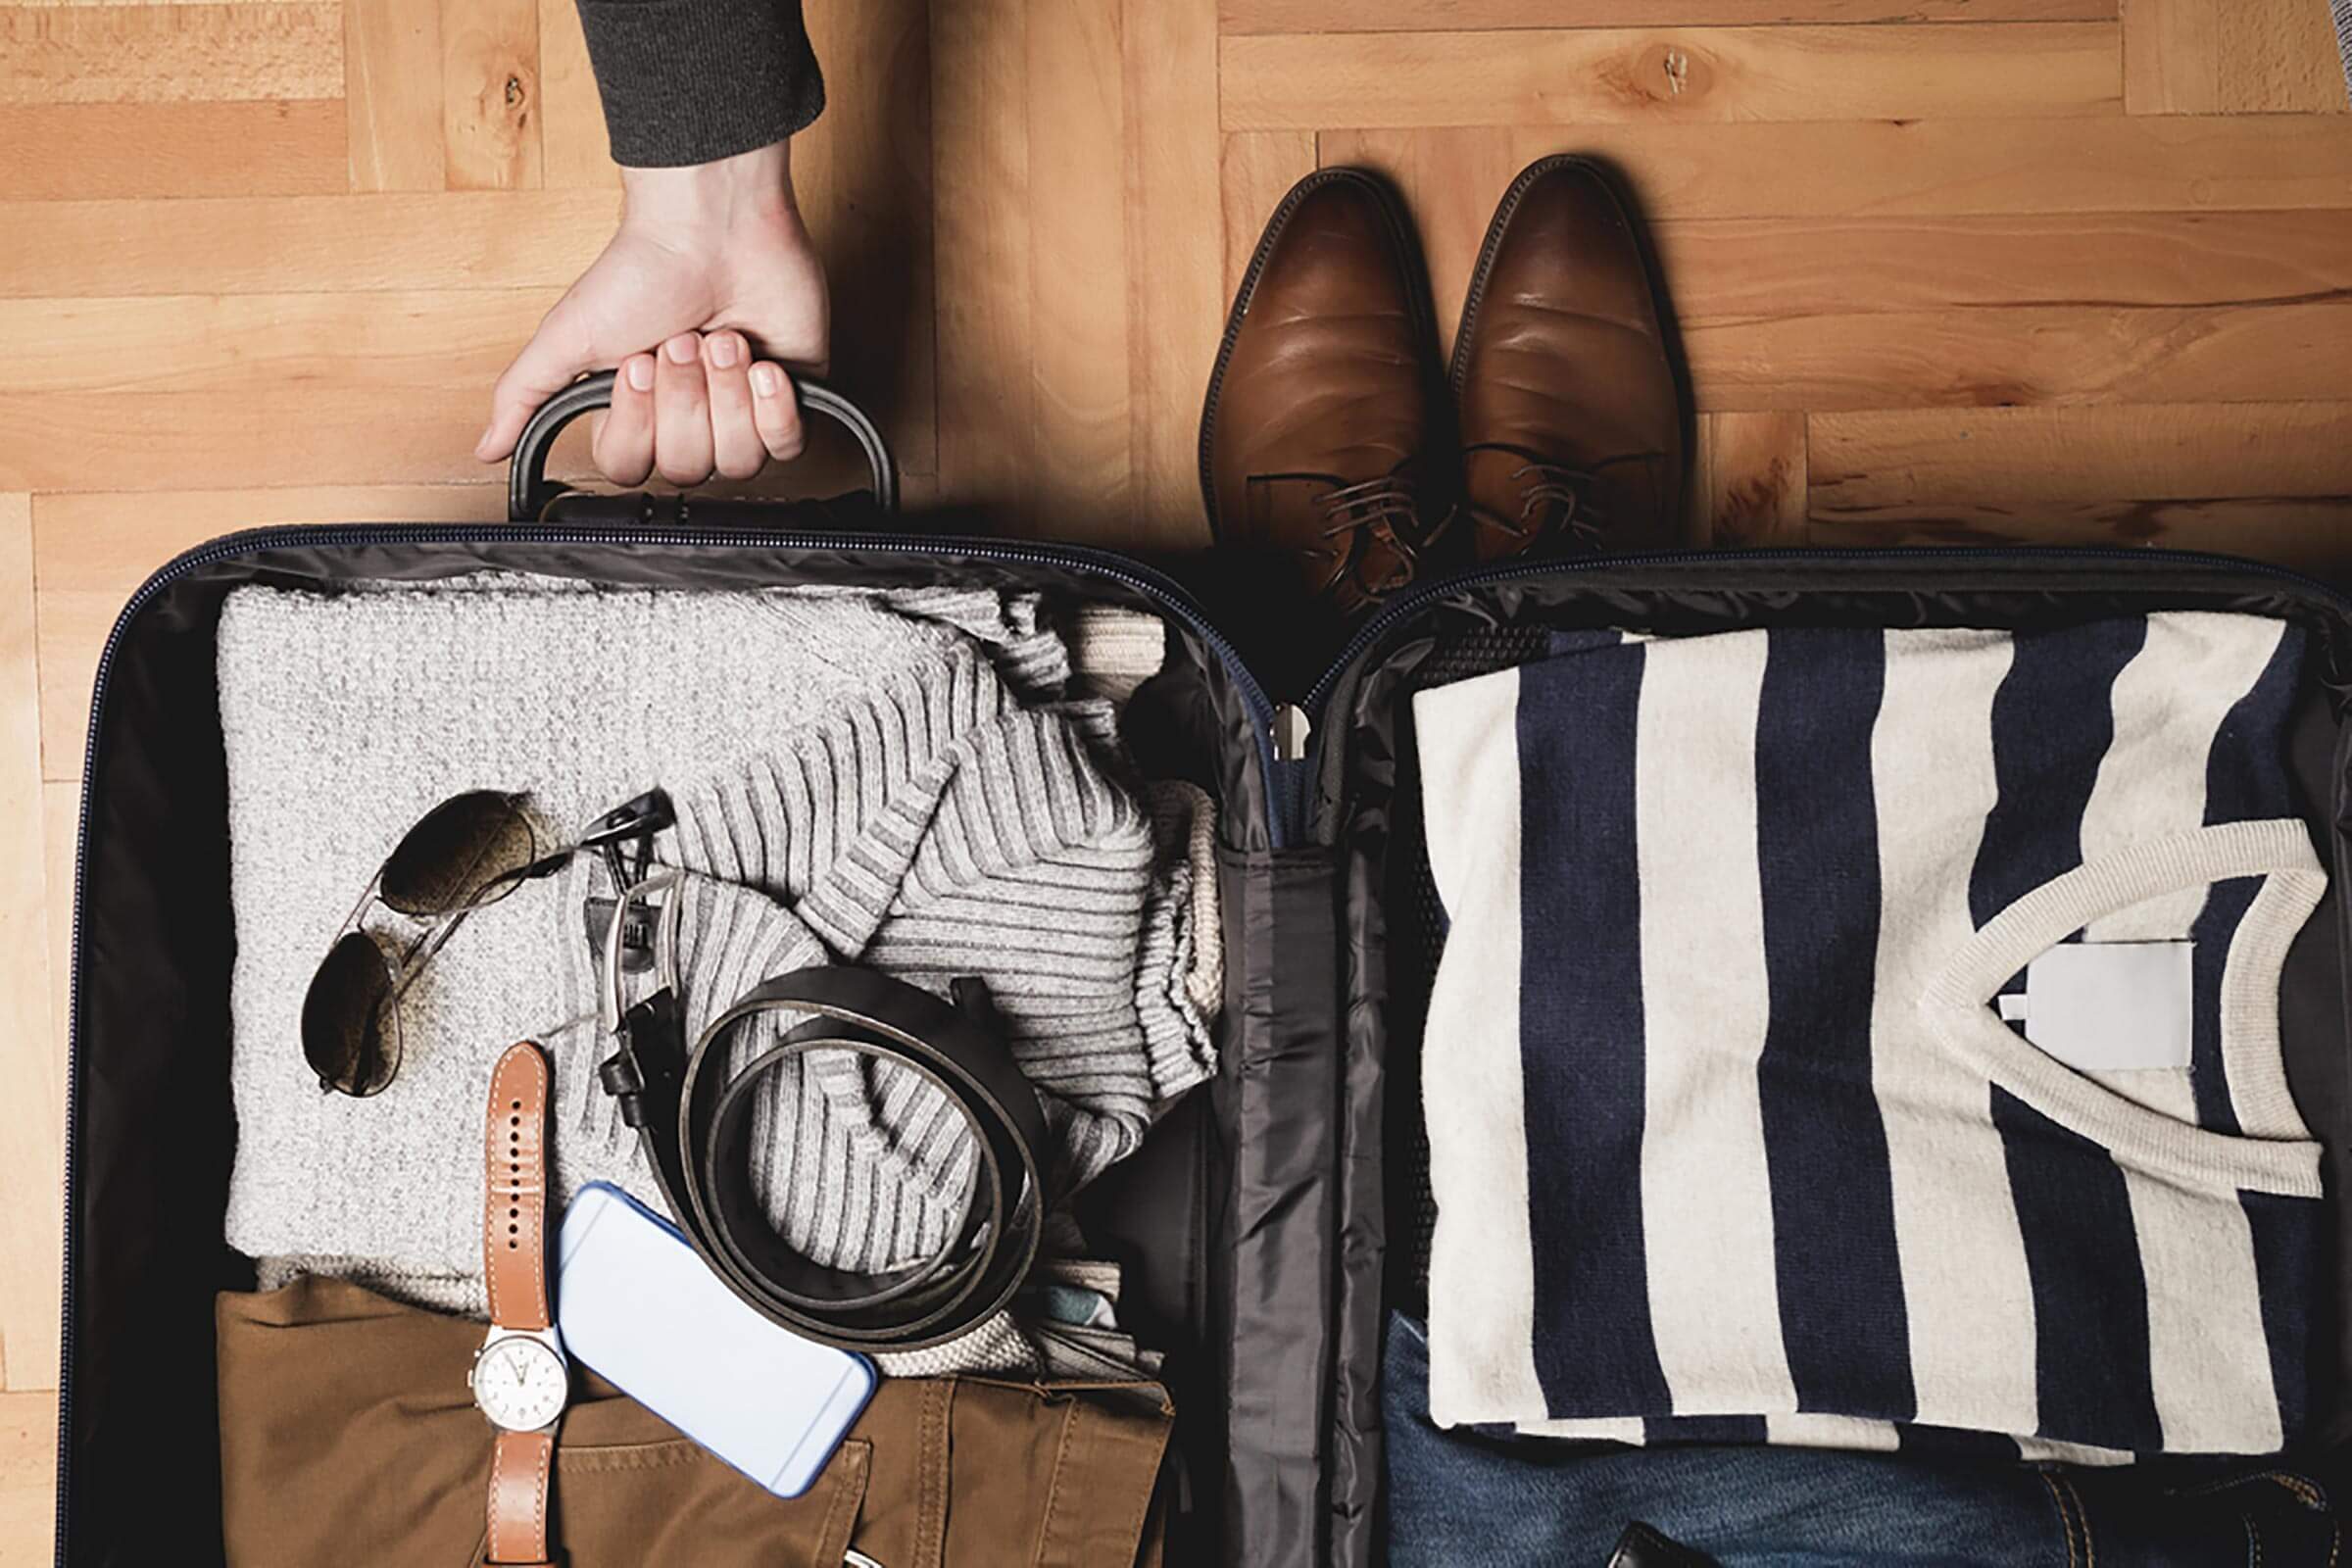 Vacation Items You Should Never Pack | Reader's Digest